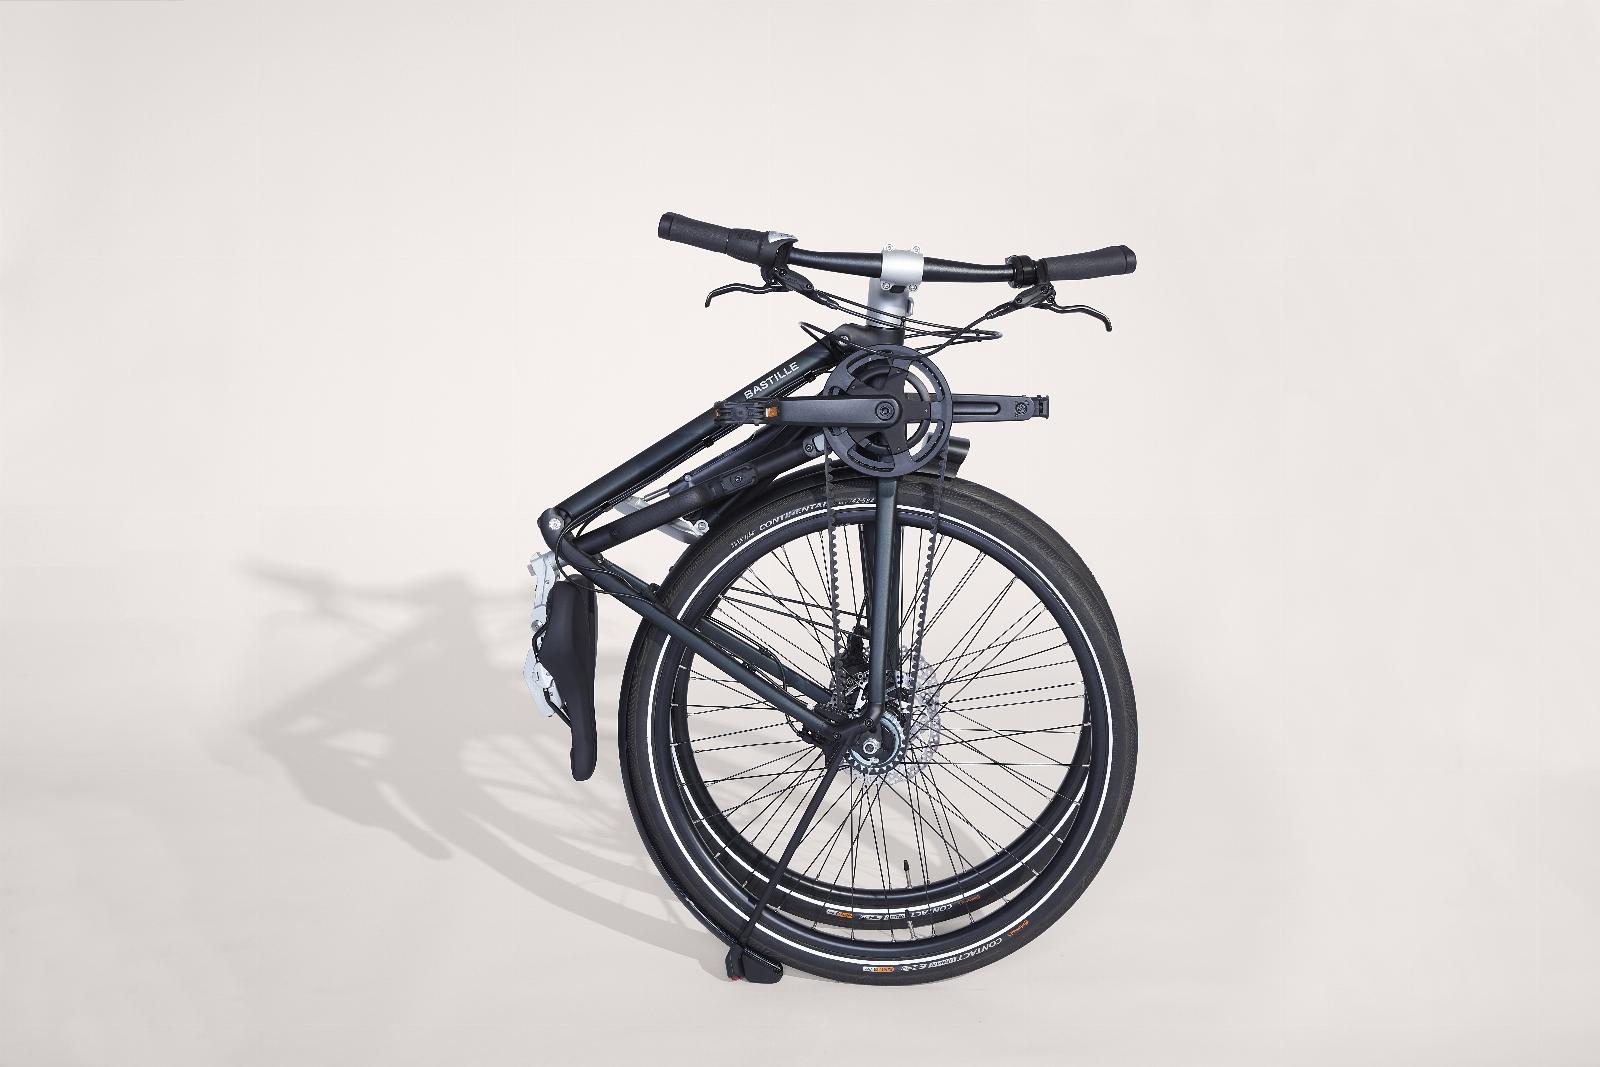 Bastille challenges the iconic Brompton bikes with a new folding bicycle